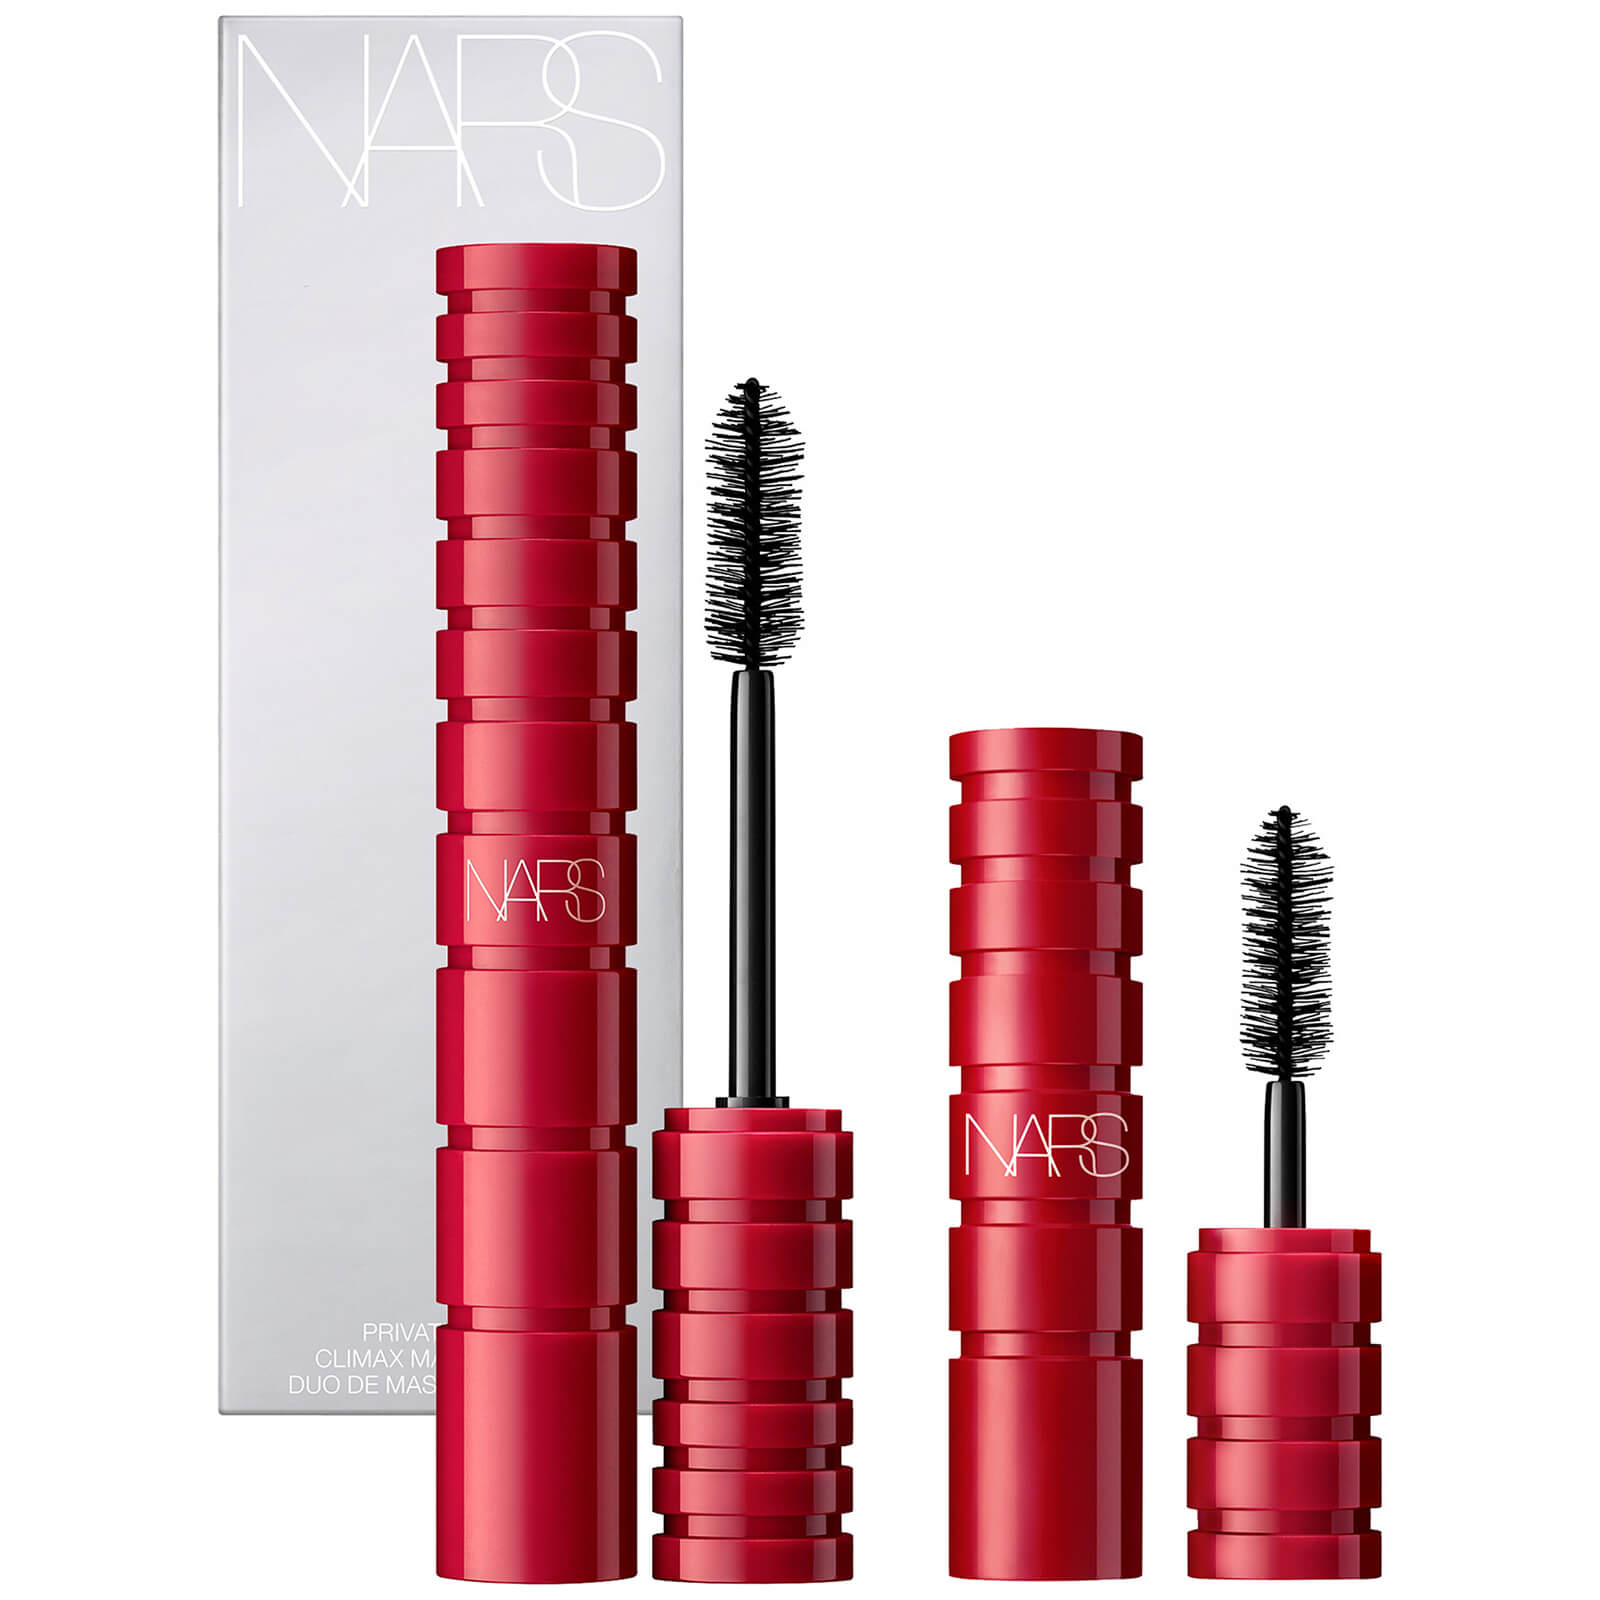 Photos - Mascara NARS Private Party Climax  Duo - Explicit Black  (Worth £40.50)